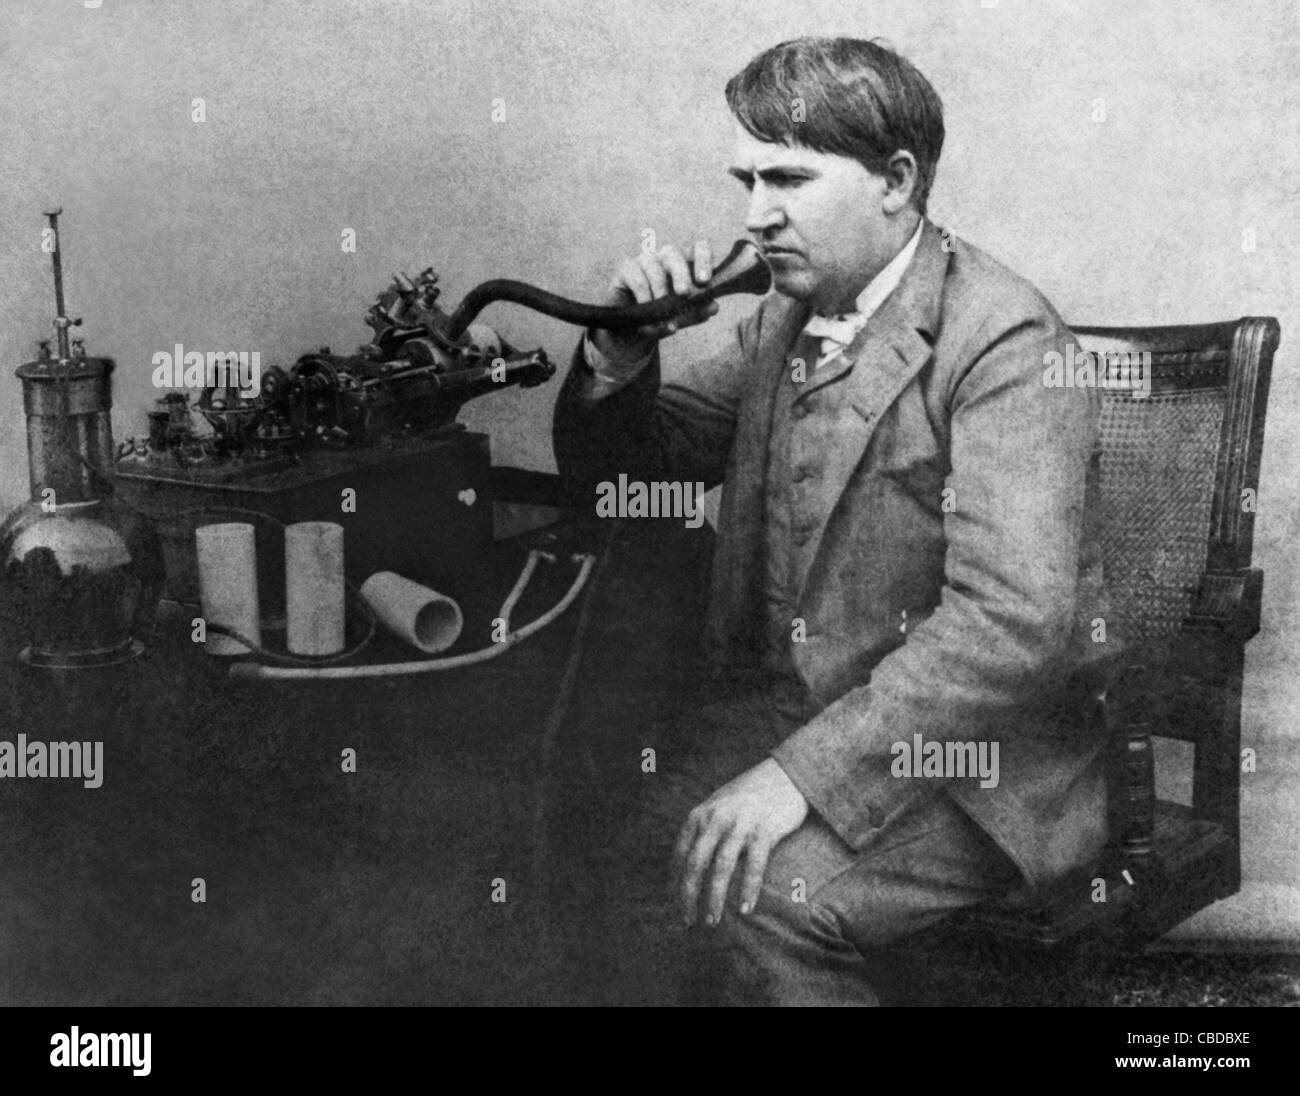 Vintage photo of American inventor and businessman Thomas Alva Edison (1847 – 1931). Edison is pictured circa 1892 with an early phonograph device. Stock Photo